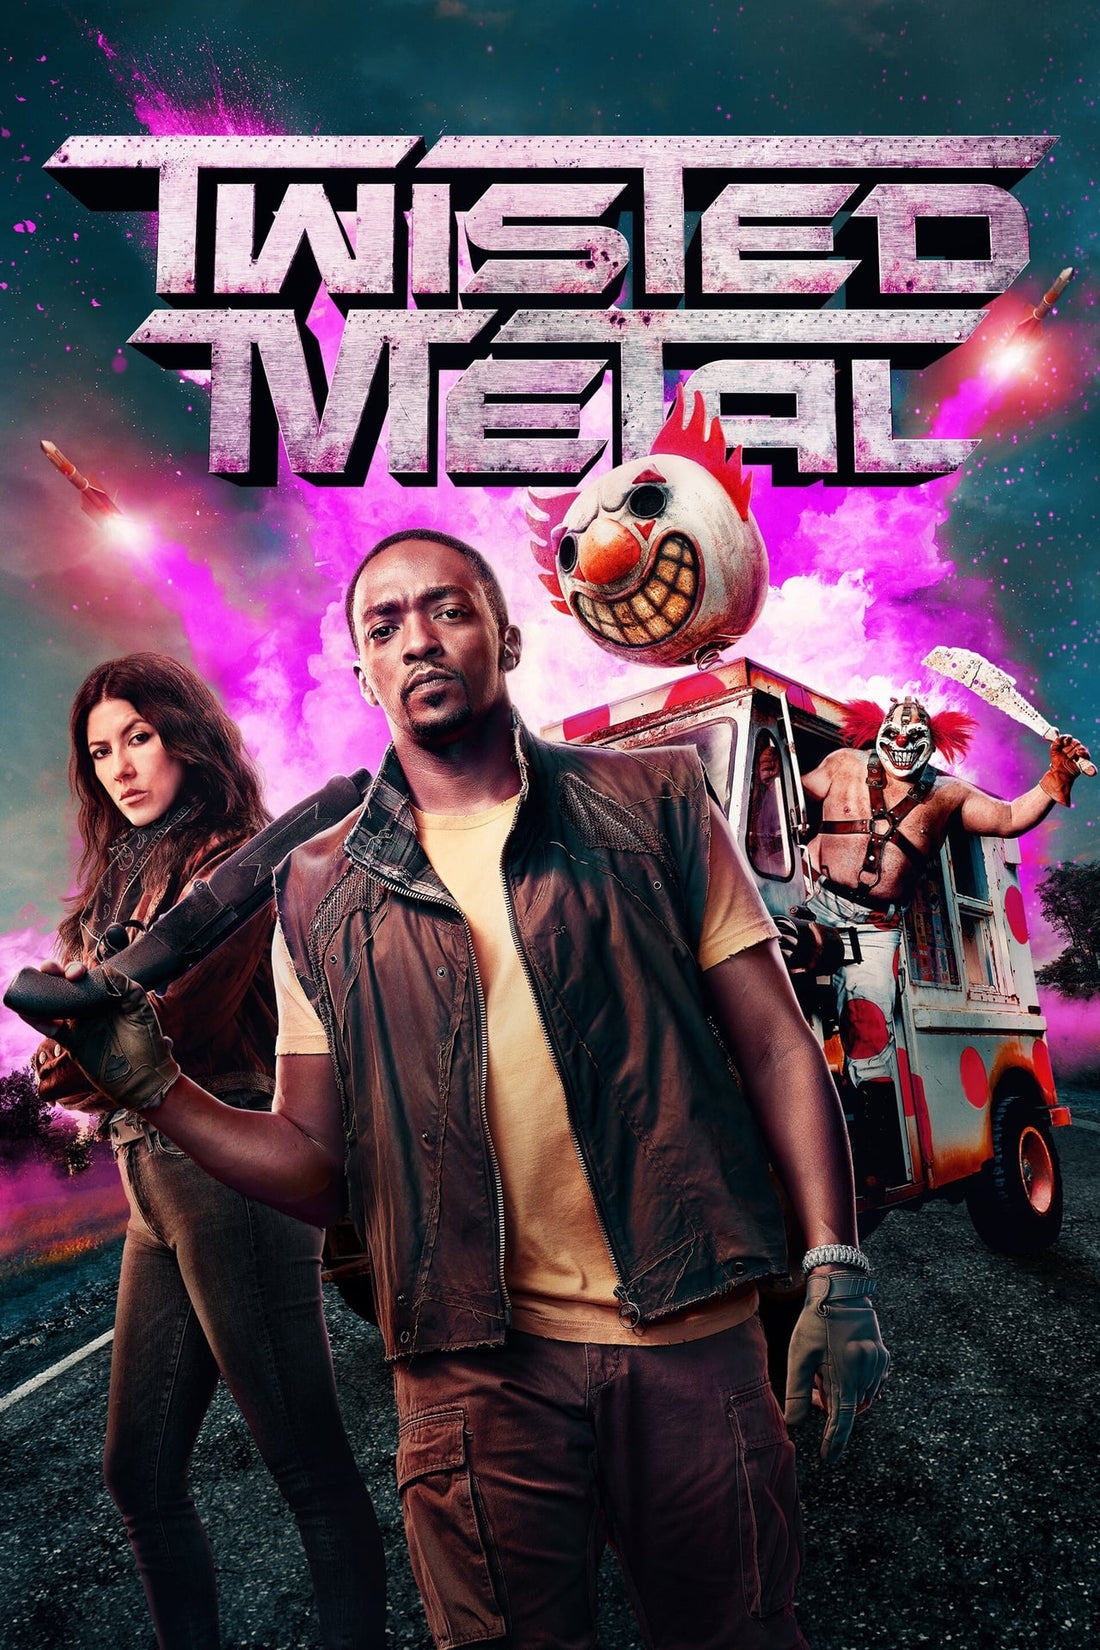 Twisted Metal cover poster